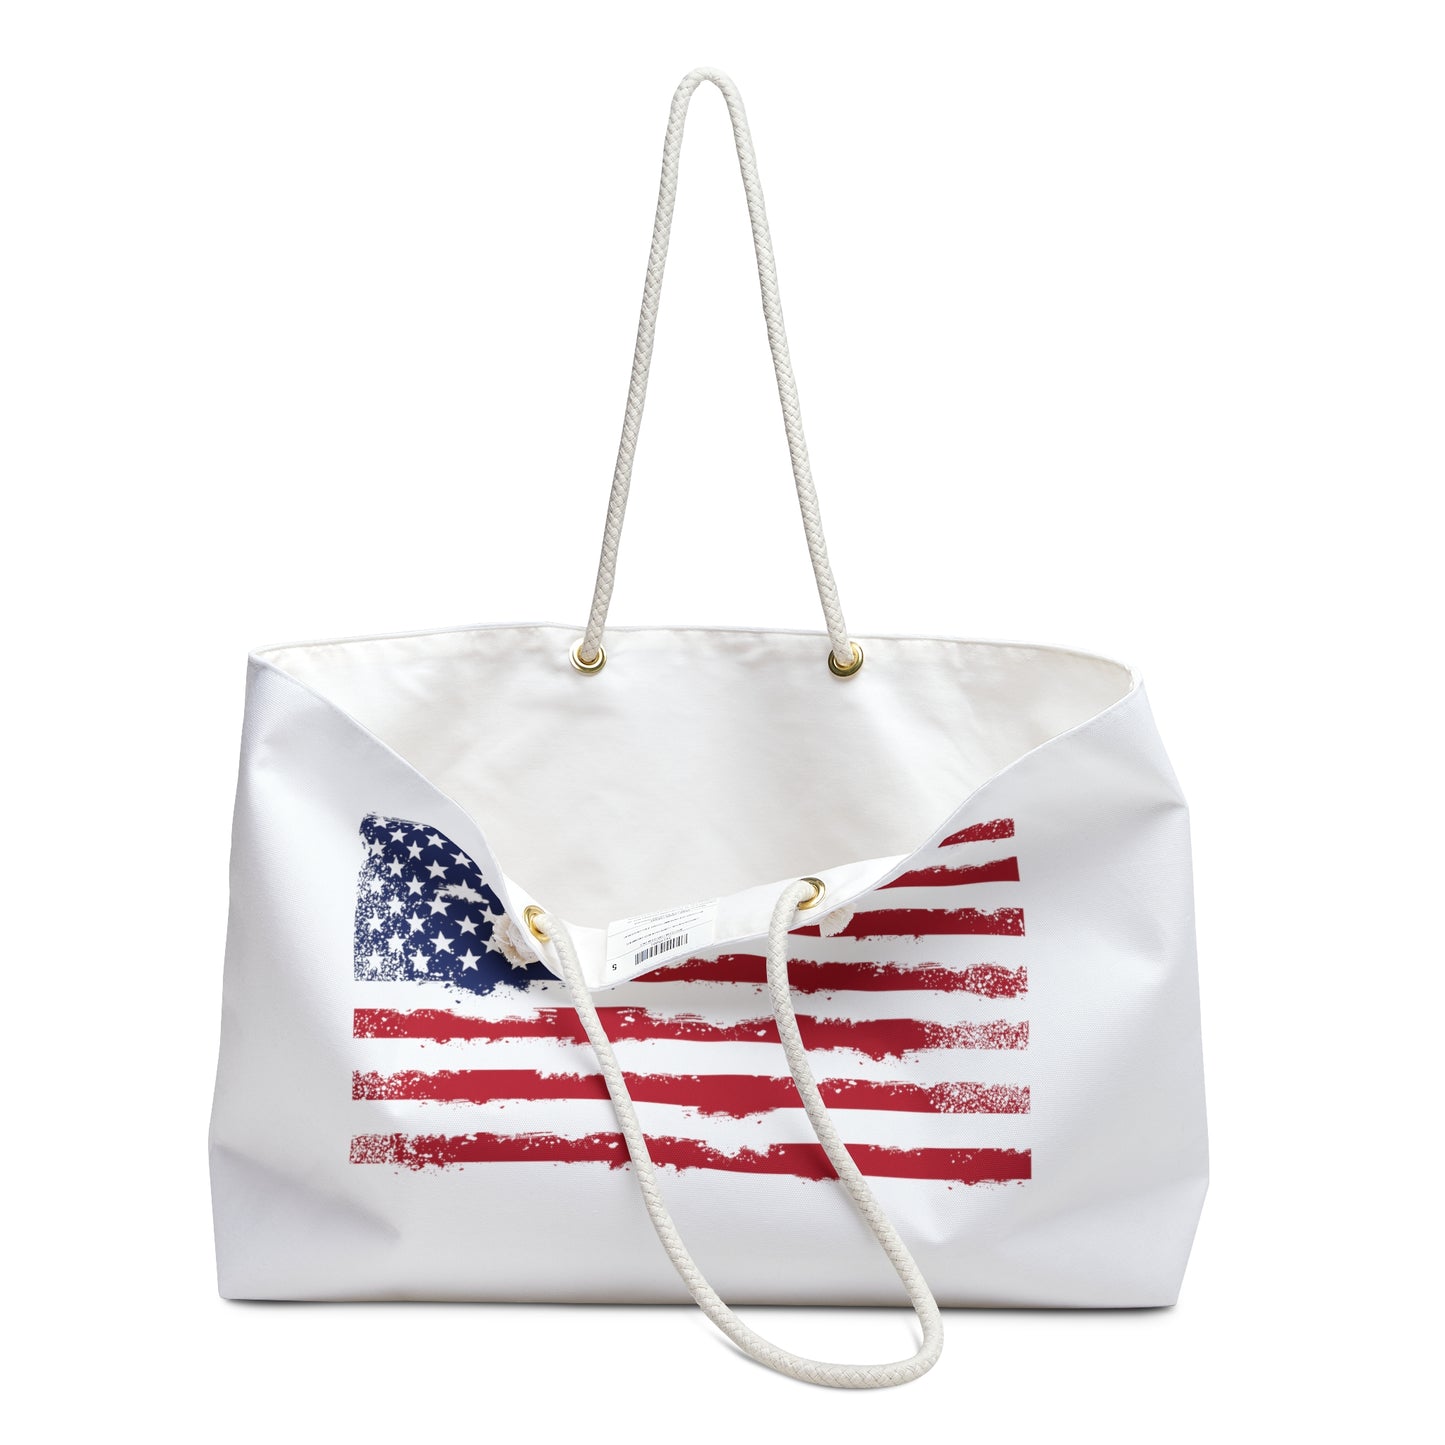 Distressed American Flag Beach Bag - Oversized Weekender Tote, Perfect for Summe